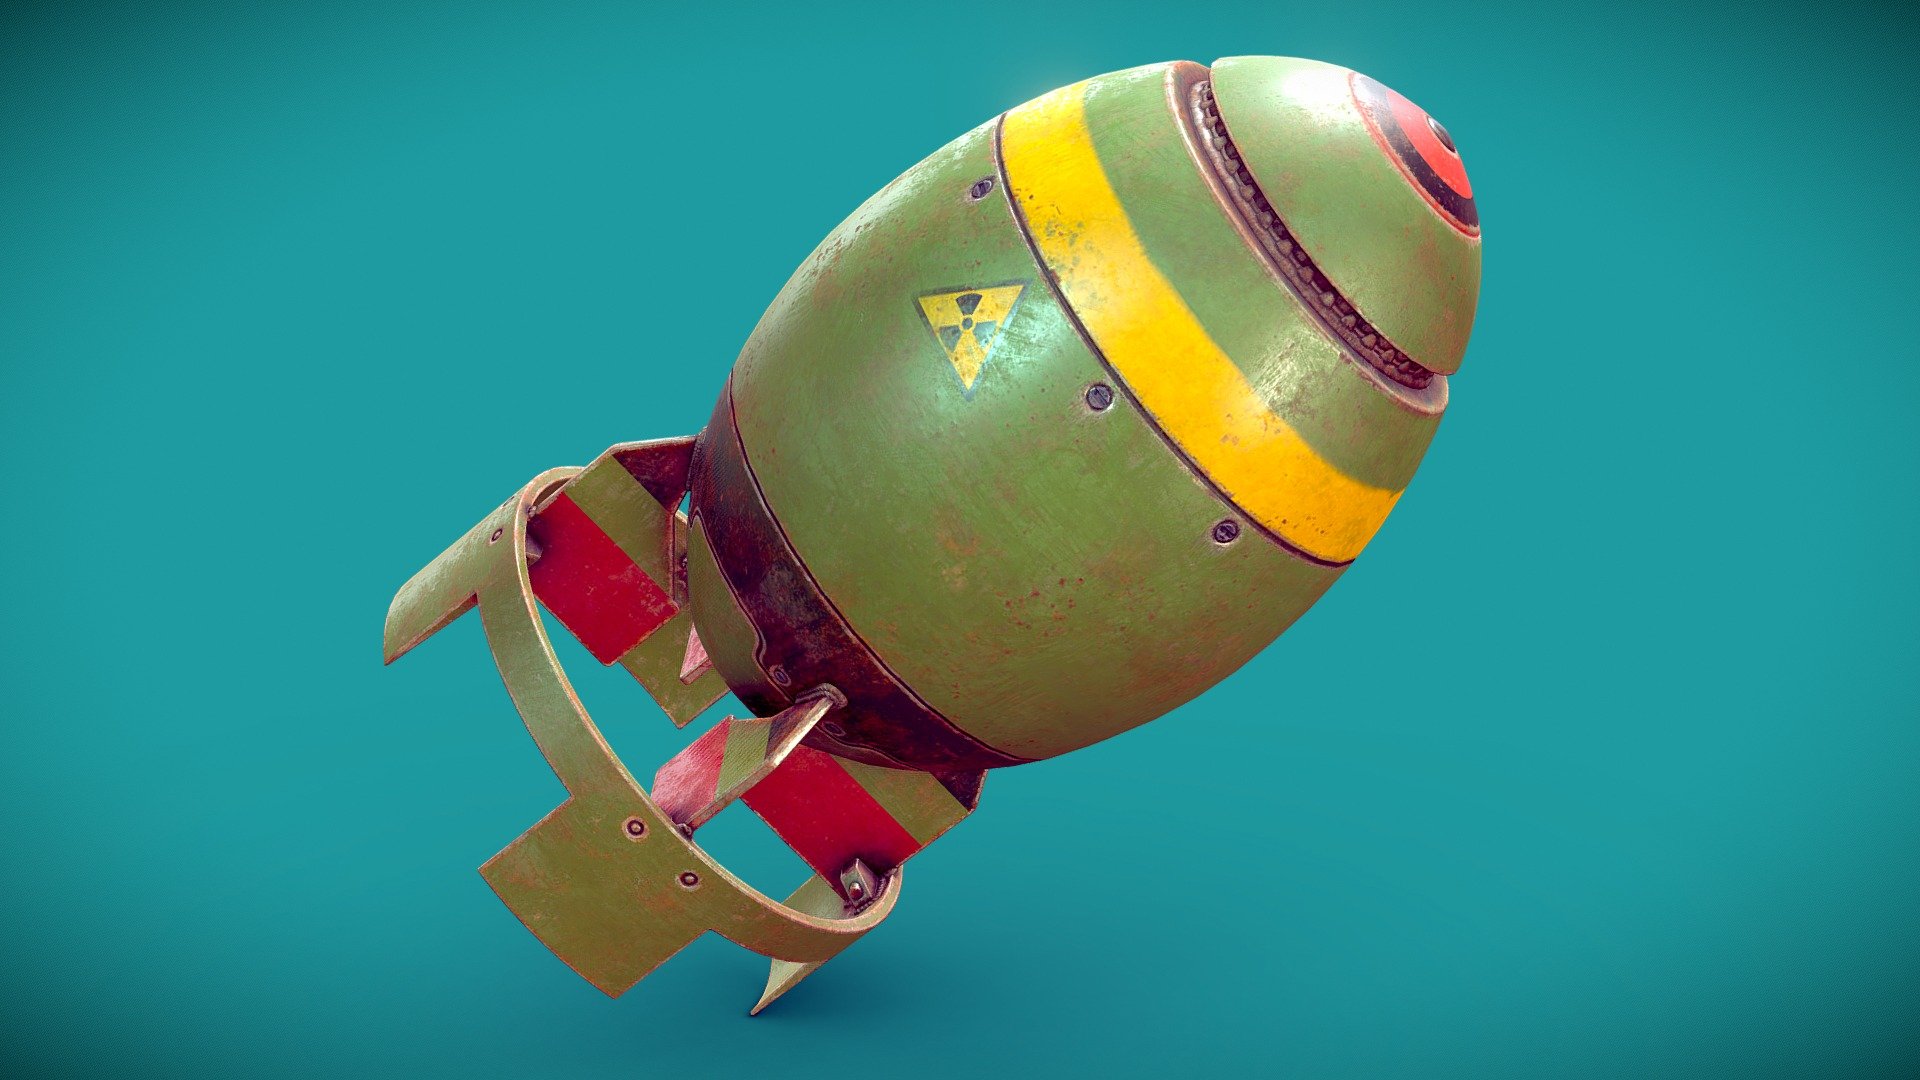 Hi guys

This is my own take on the Mini Nuke from the Fallout series.

Click me for more pictures

PBR / 2K Textures - Fanart - Fallout - Mini Nuke - 3D model by Sebastian Irmer (@.sebastian.) 3d model